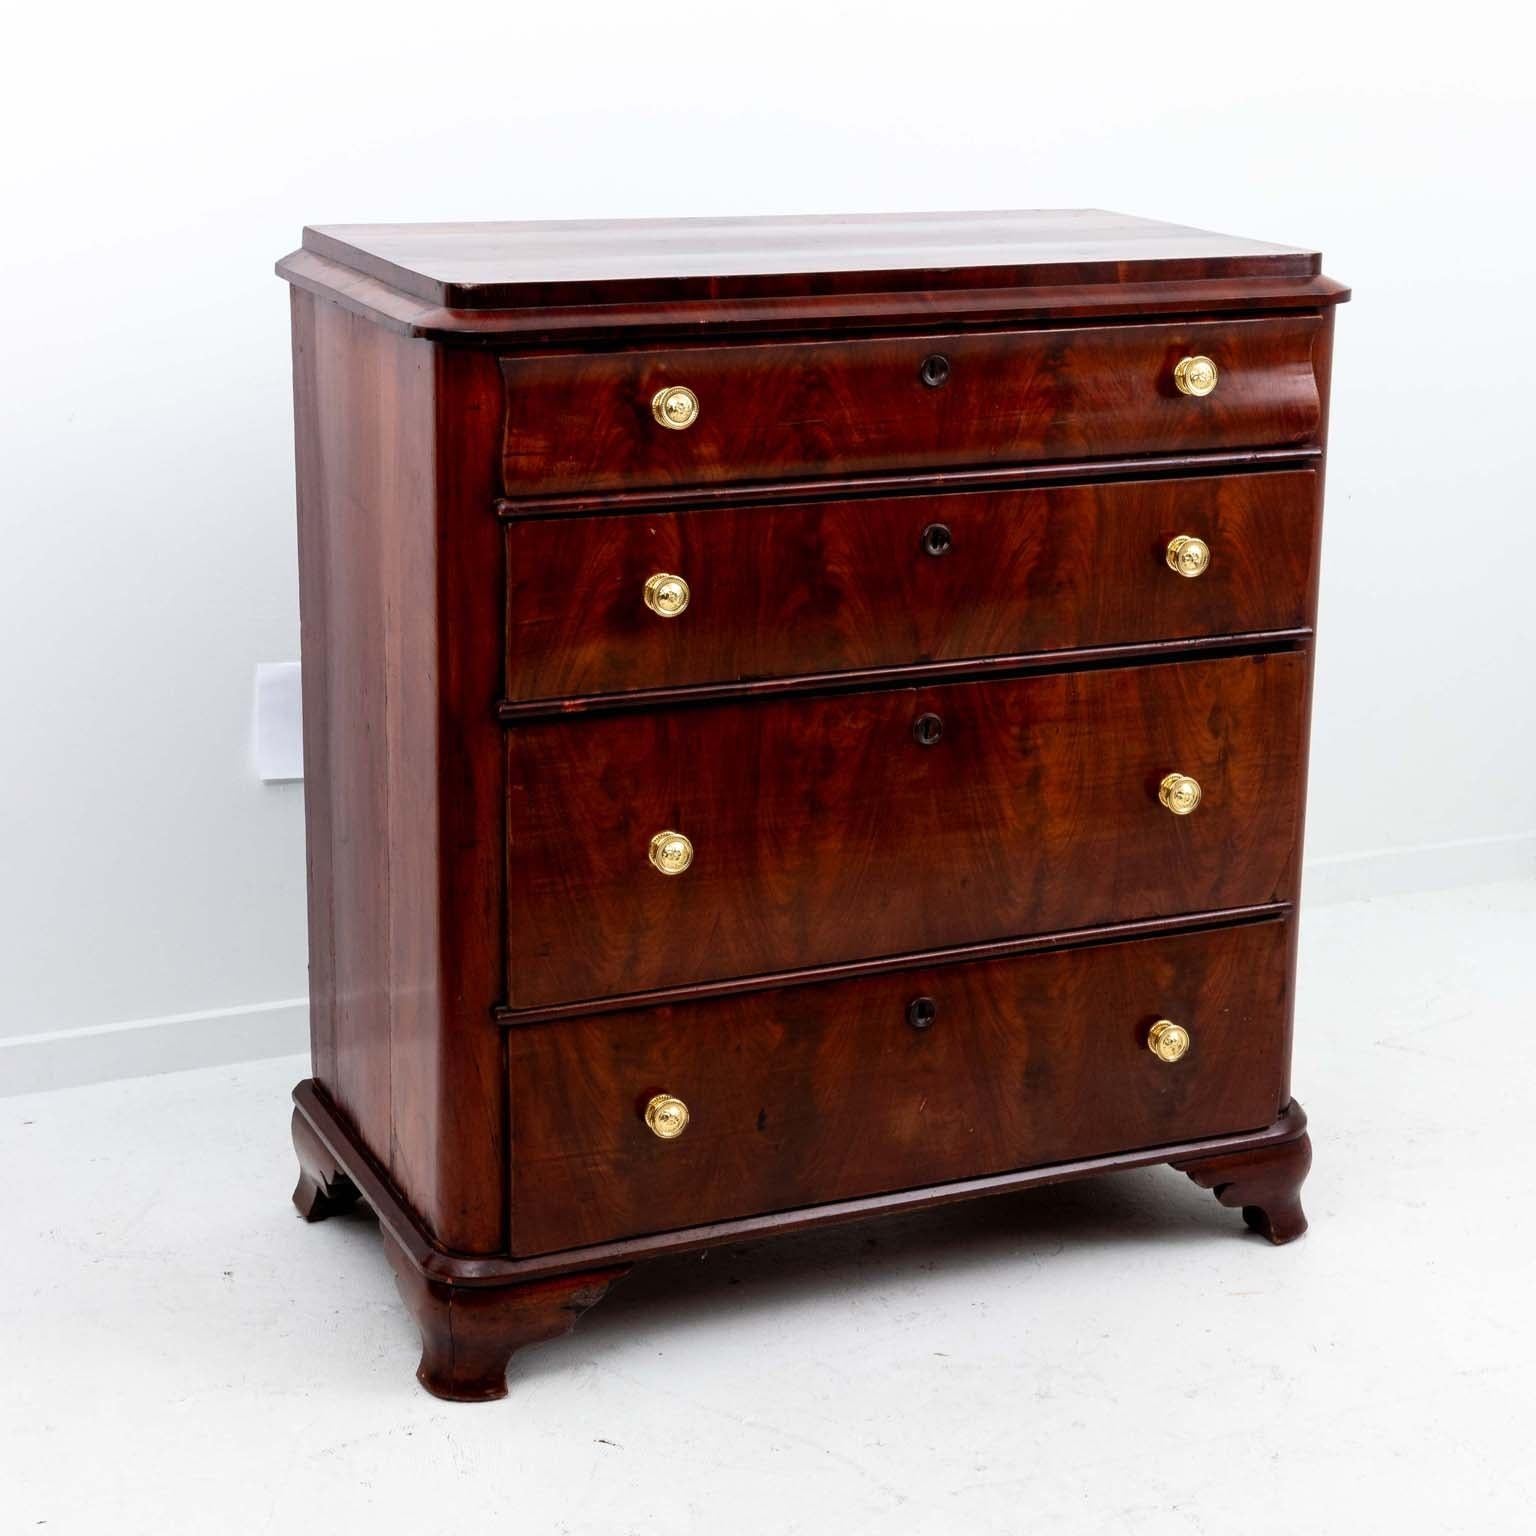 Circa 19th Century four drawer commode. The piece is mahogany with brass pulls in the French empire style.
